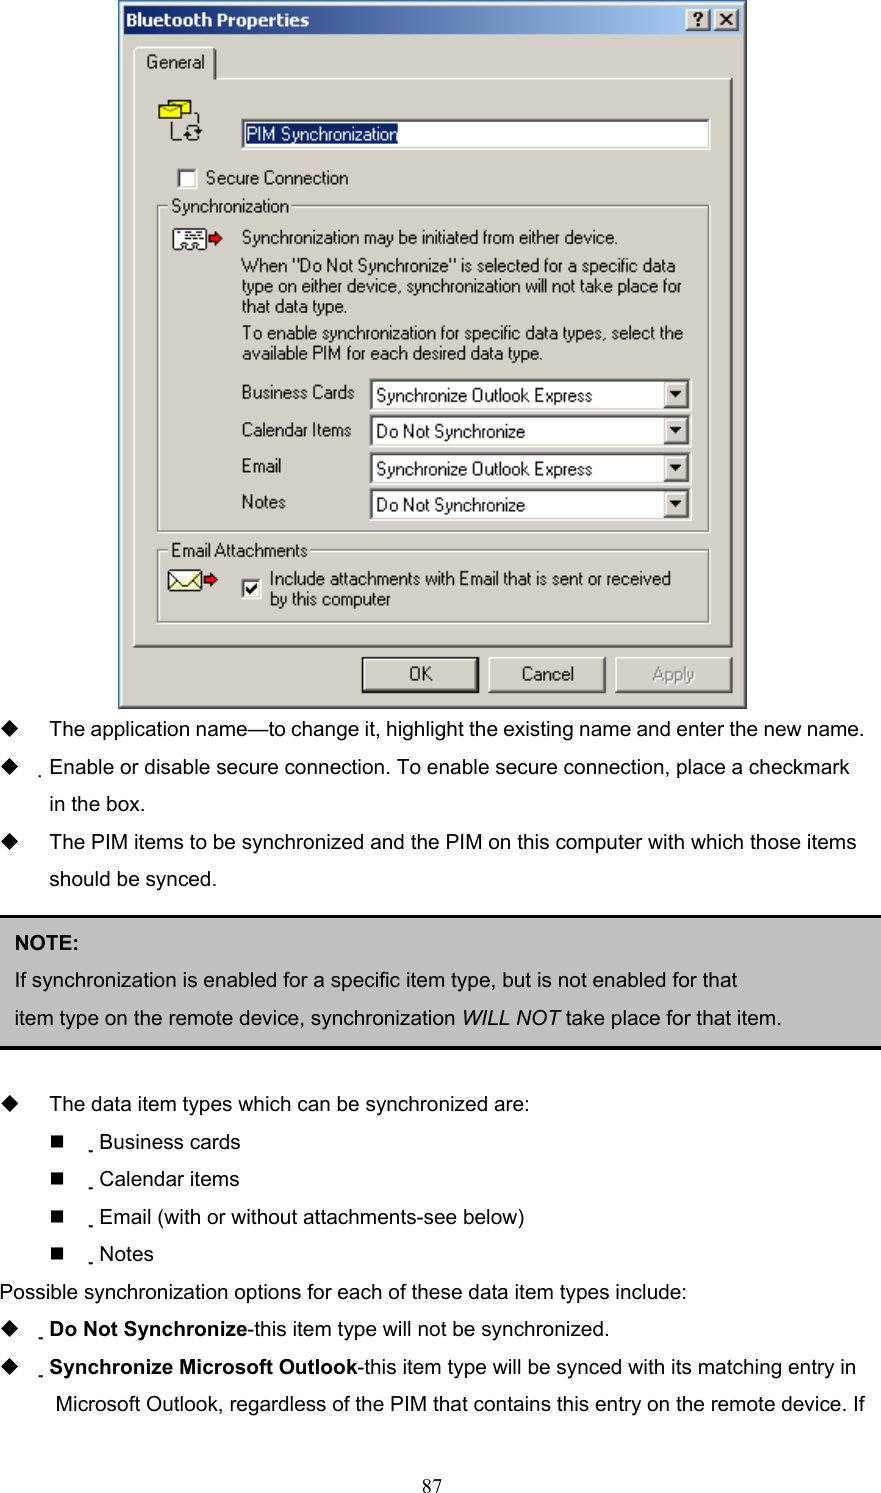  87    The application name—to change it, highlight the existing name and enter the new name.   Enable or disable secure connection. To enable secure connection, place a checkmark in the box.     The PIM items to be synchronized and the PIM on this computer with which those items should be synced.        The data item types which can be synchronized are:   Business cards   Calendar items   Email (with or without attachments-see below)   Notes Possible synchronization options for each of these data item types include:   Do Not Synchronize-this item type will not be synchronized.   Synchronize Microsoft Outlook-this item type will be synced with its matching entry in Microsoft Outlook, regardless of the PIM that contains this entry on the remote device. If NOTE:  If synchronization is enabled for a specific item type, but is not enabled for that item type on the remote device, synchronization WILL NOT take place for that item. 